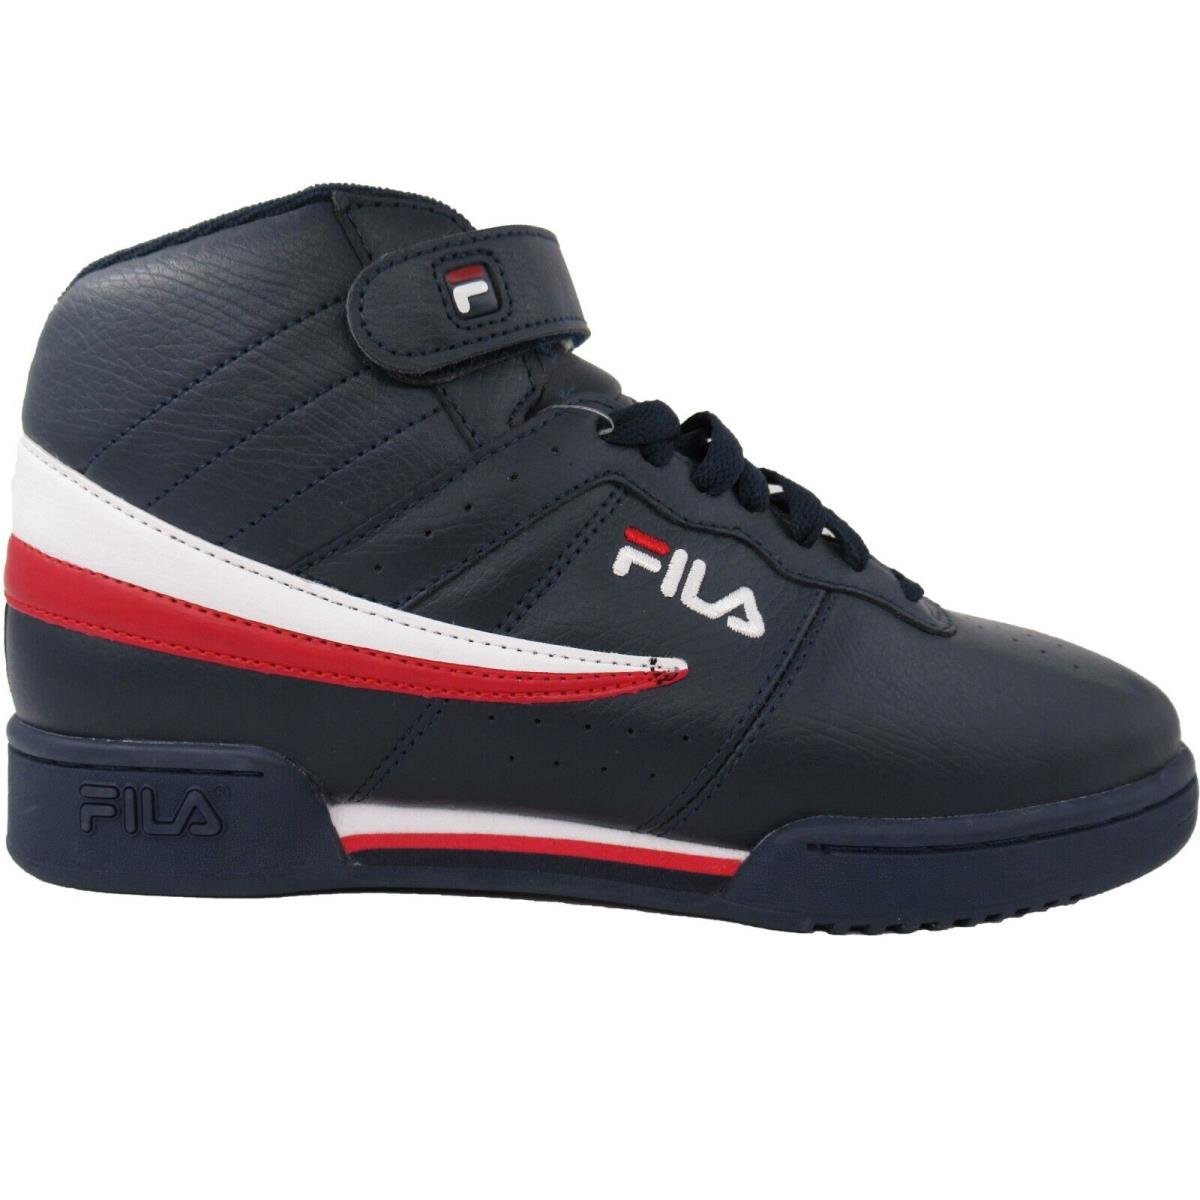 Fila Men`s F-13 Classic Casual Athletic Shoes 1VF059LX-460 - Navy, White, Red